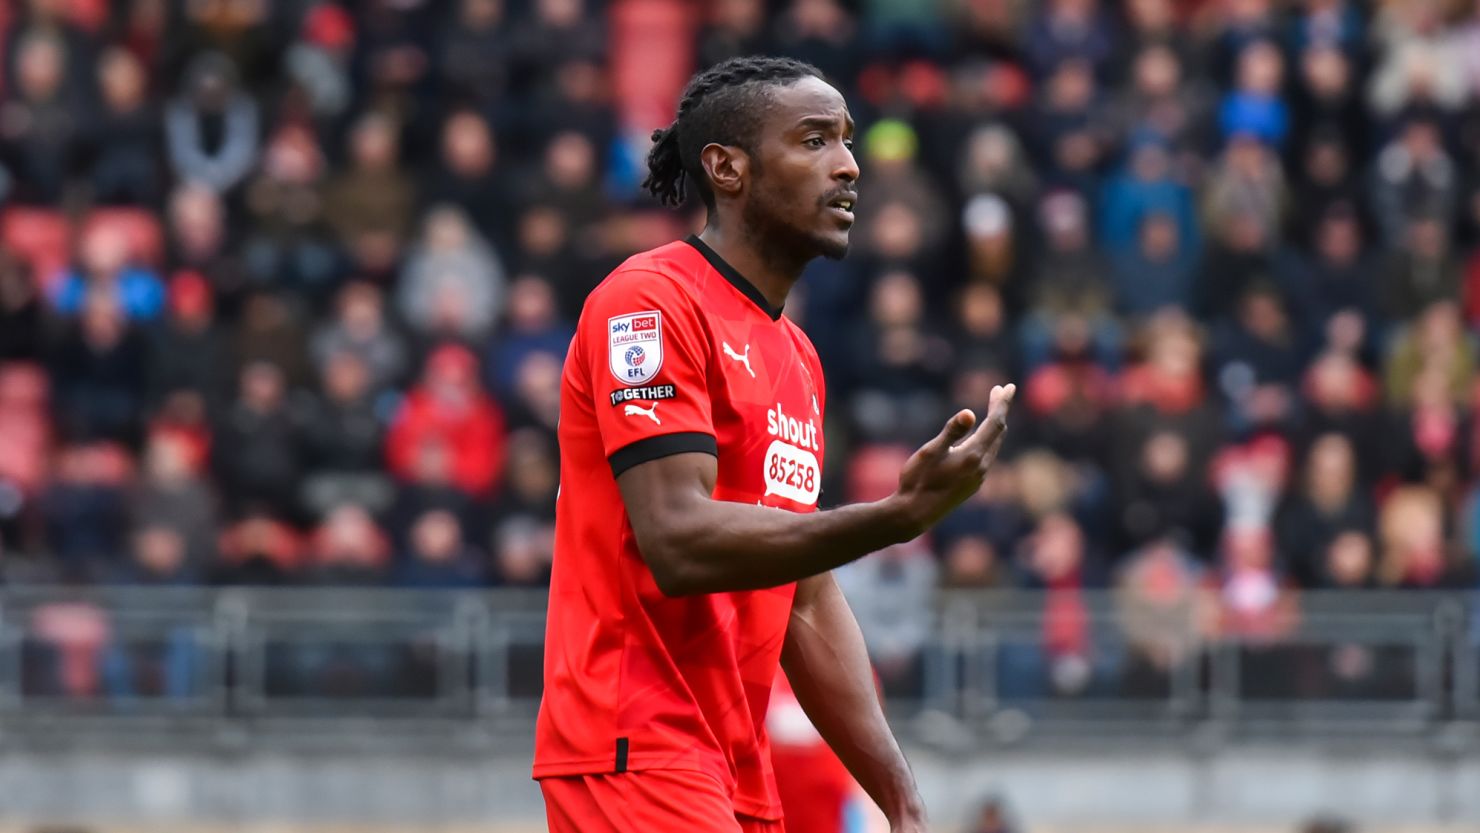 Omar Beckles of Leyton Orient gives instructions to his team-mates during the Sky Bet League 2 match between Leyton Orient and Carlisle United at the Matchroom Stadium, London on Saturday 1st April 2023. (Photo by Ivan Yordanov/MI News/NurPhoto via Getty Images)